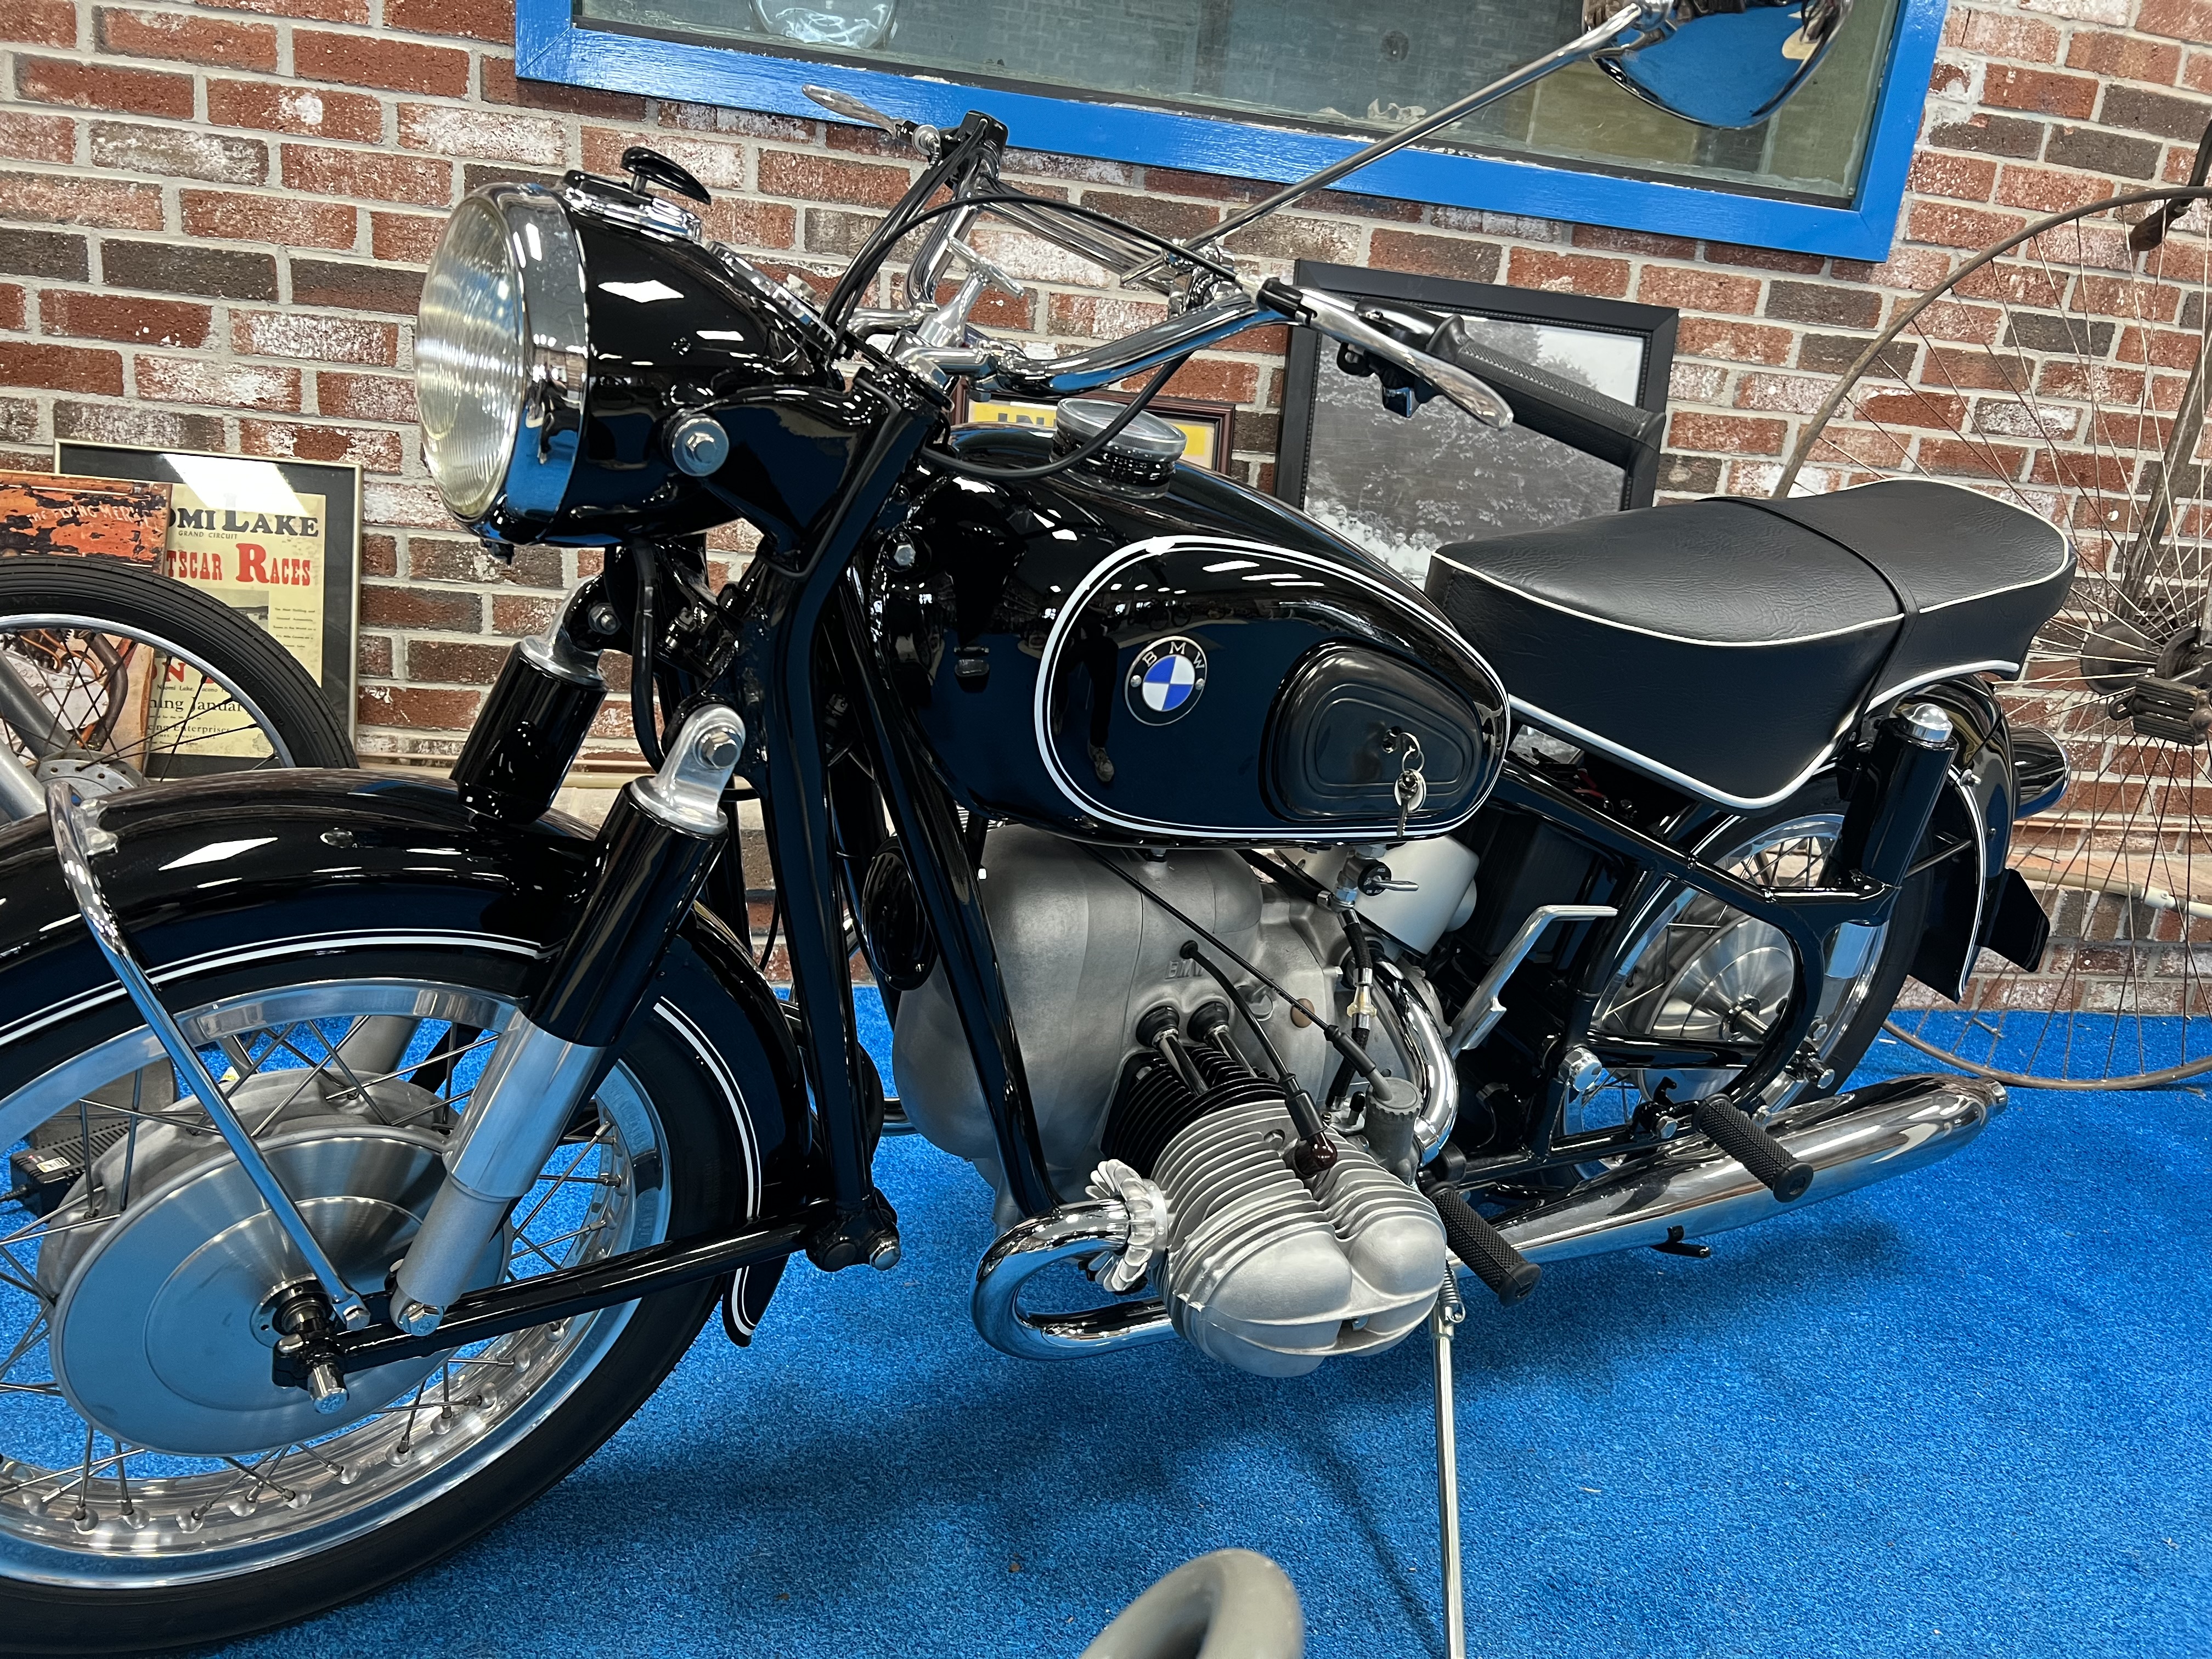 1961 BMW R69S donated to 10 year old Ryker Shappy originally owned by his late grandfather, Bob Shappy.